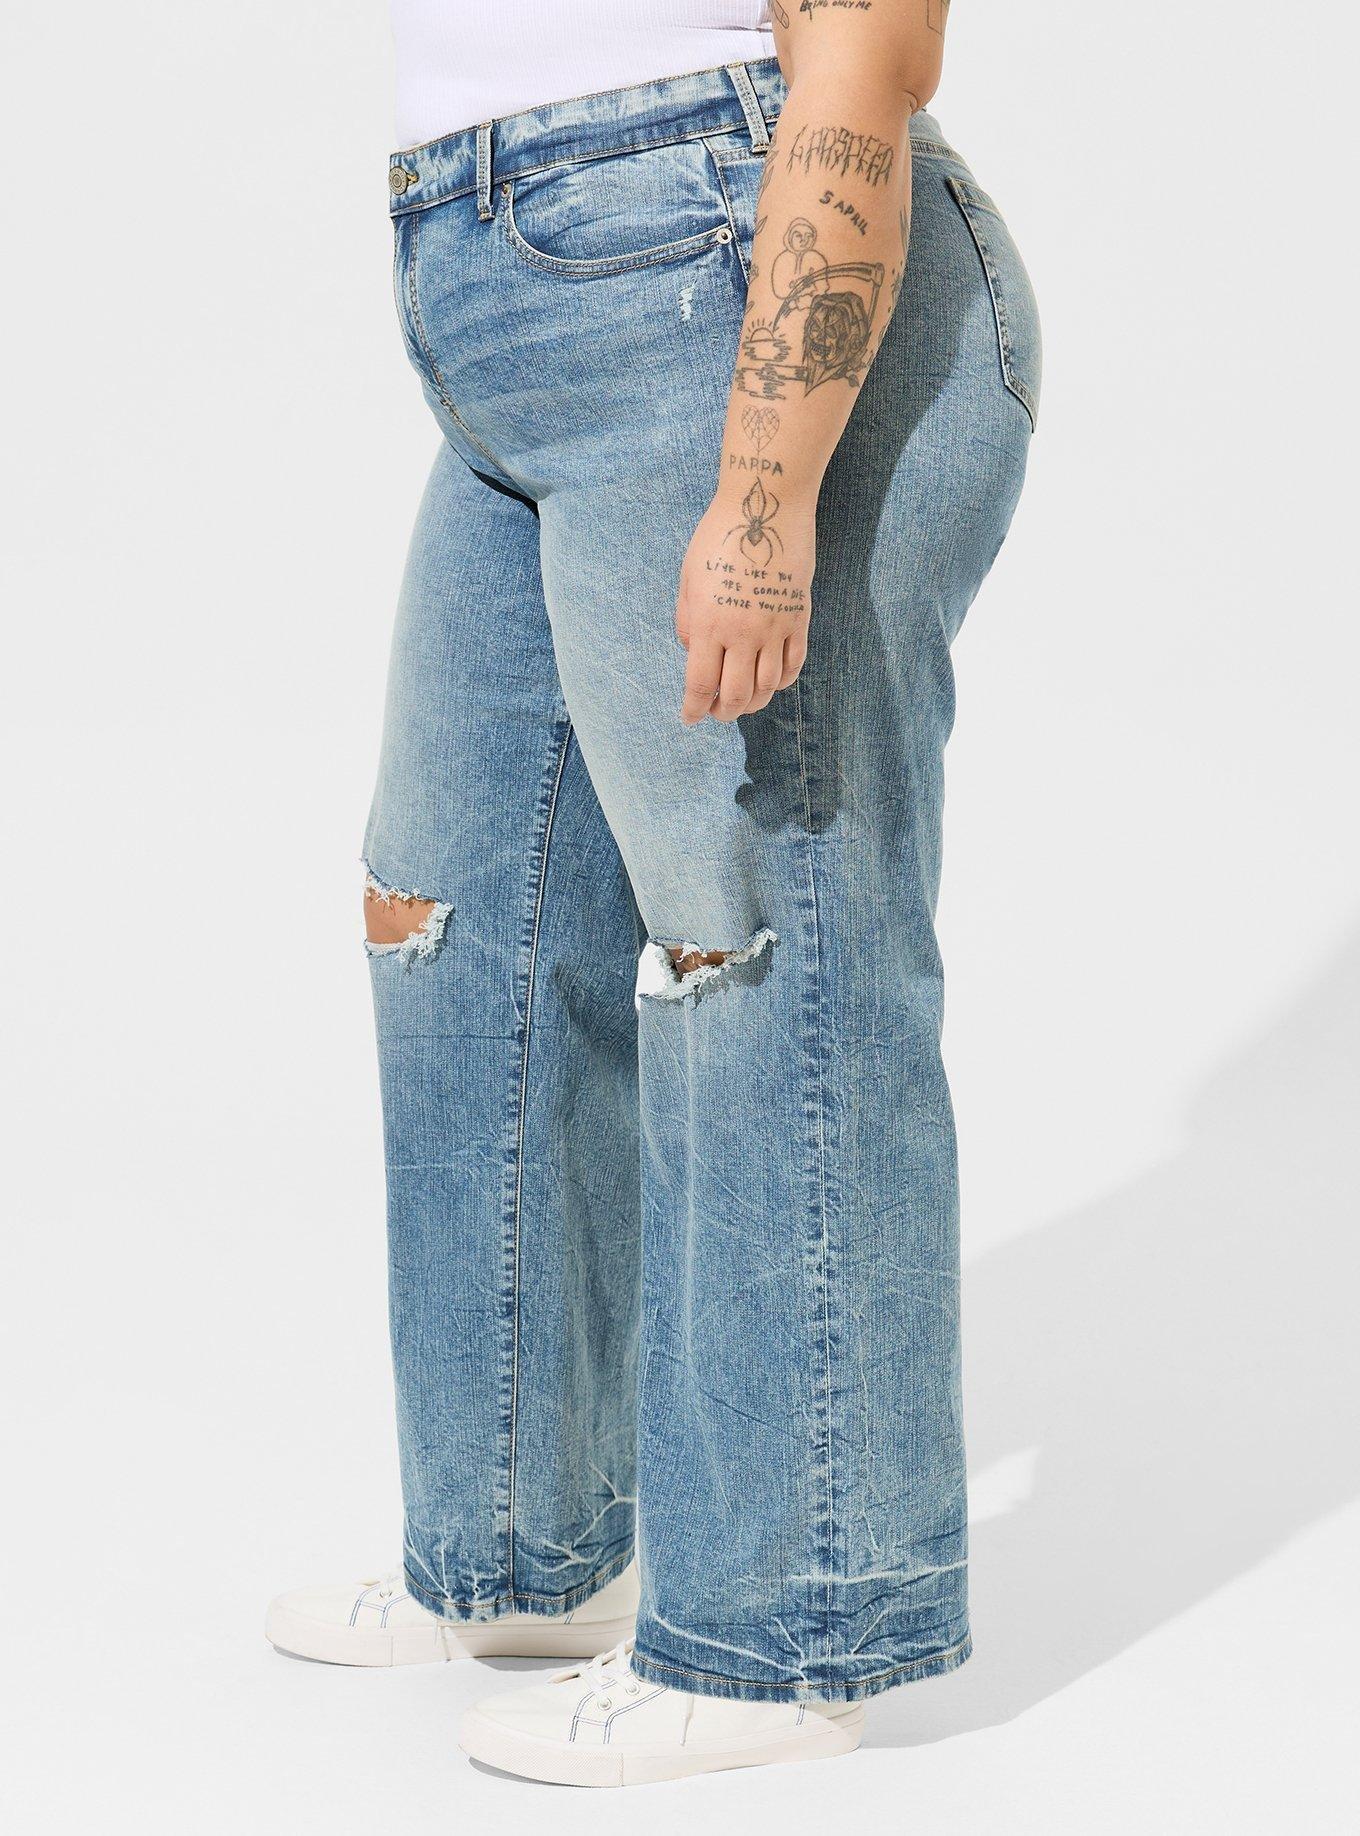 Levi's High Waisted Mom Jeans - Fun Mom - Miss Monroe Boutique